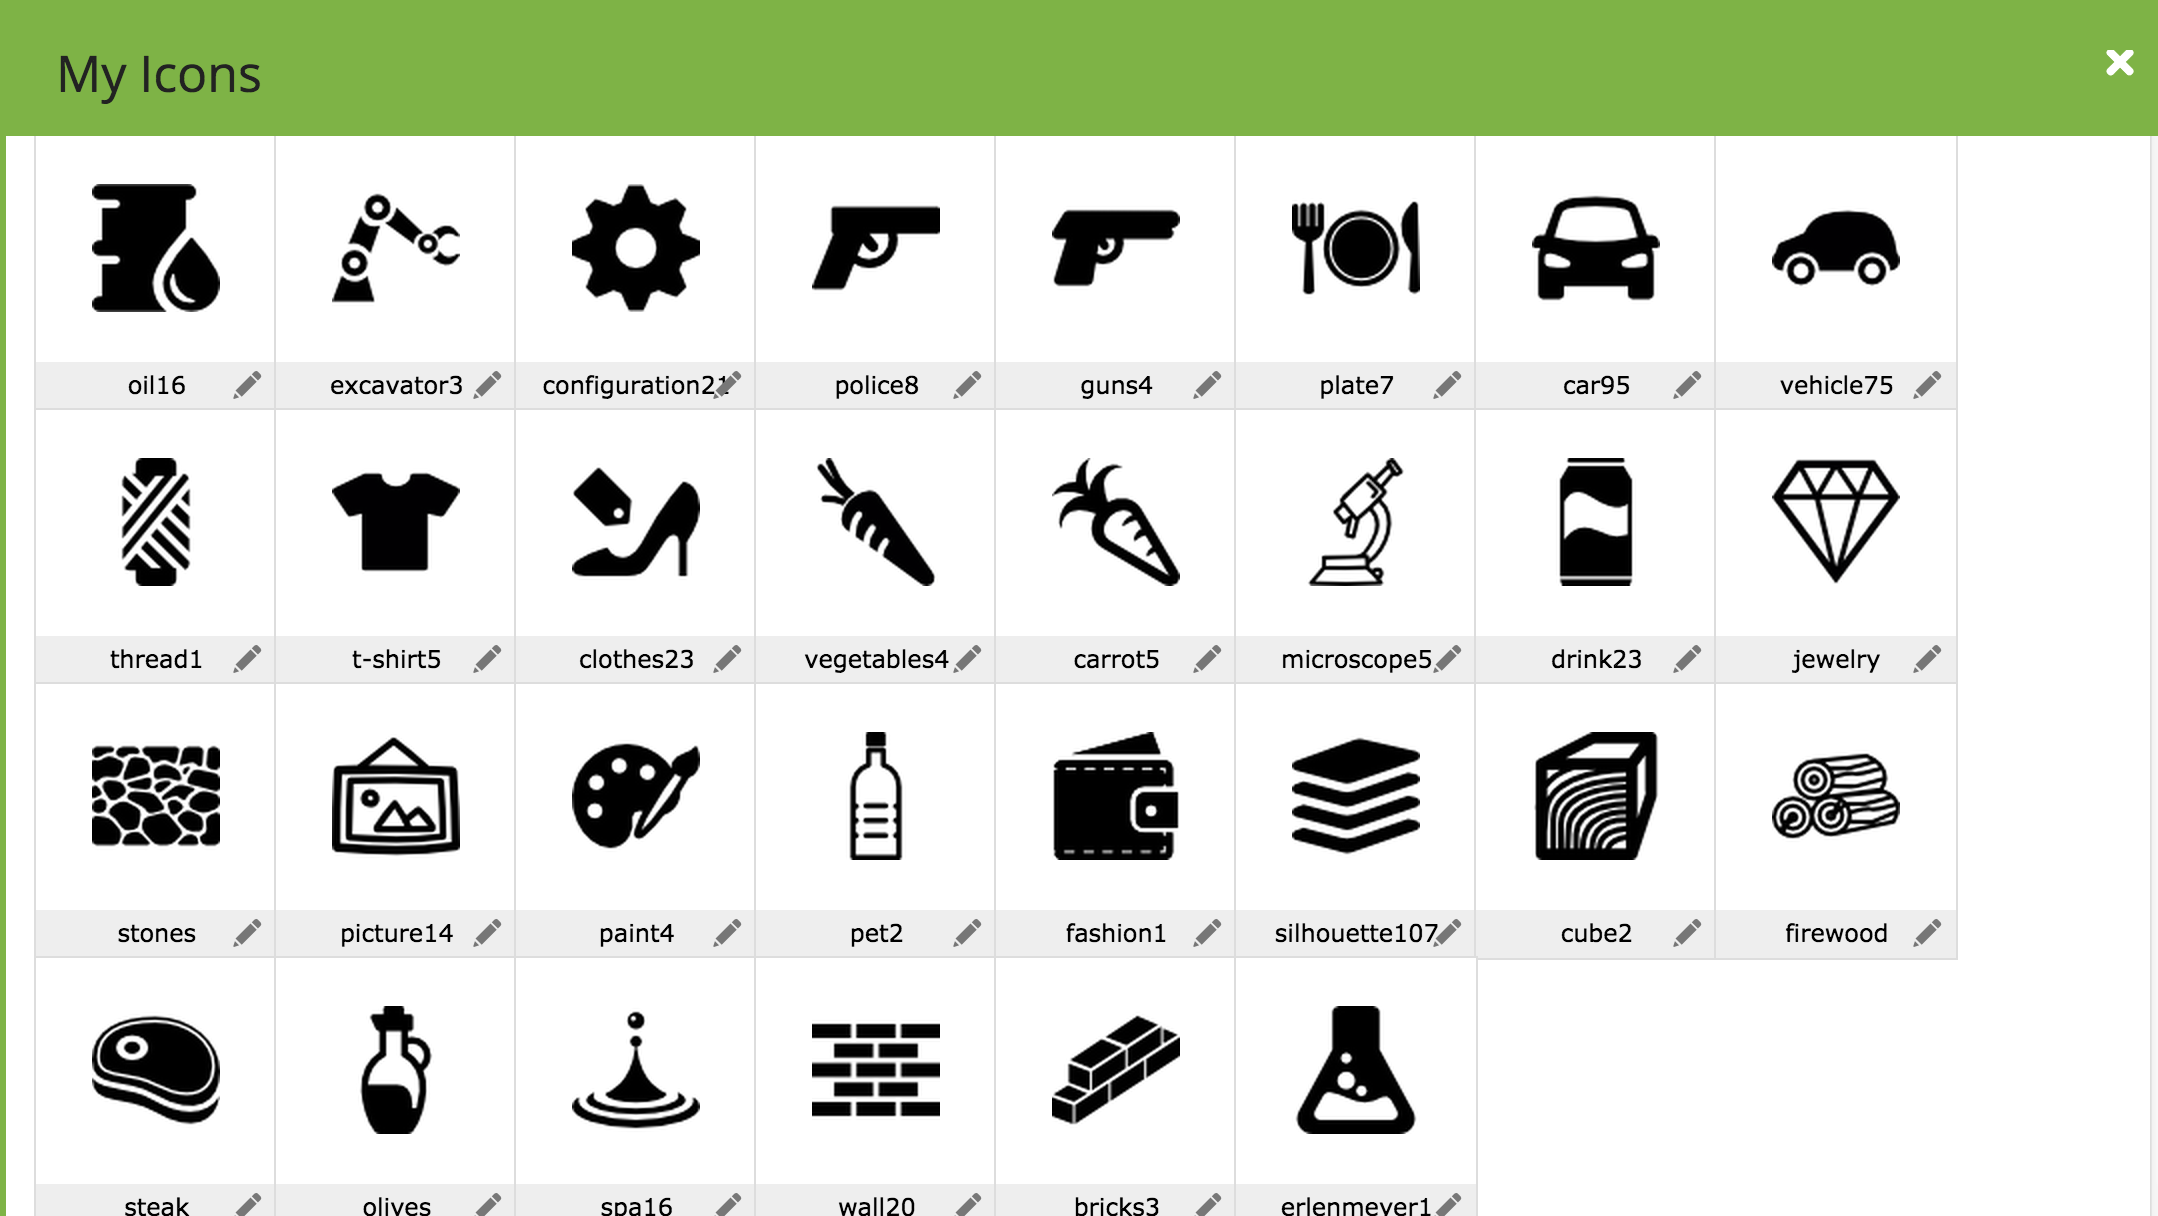 My Flaticon selection for the treemap. For some categories I selected multiple icons, to see which ones worked best.